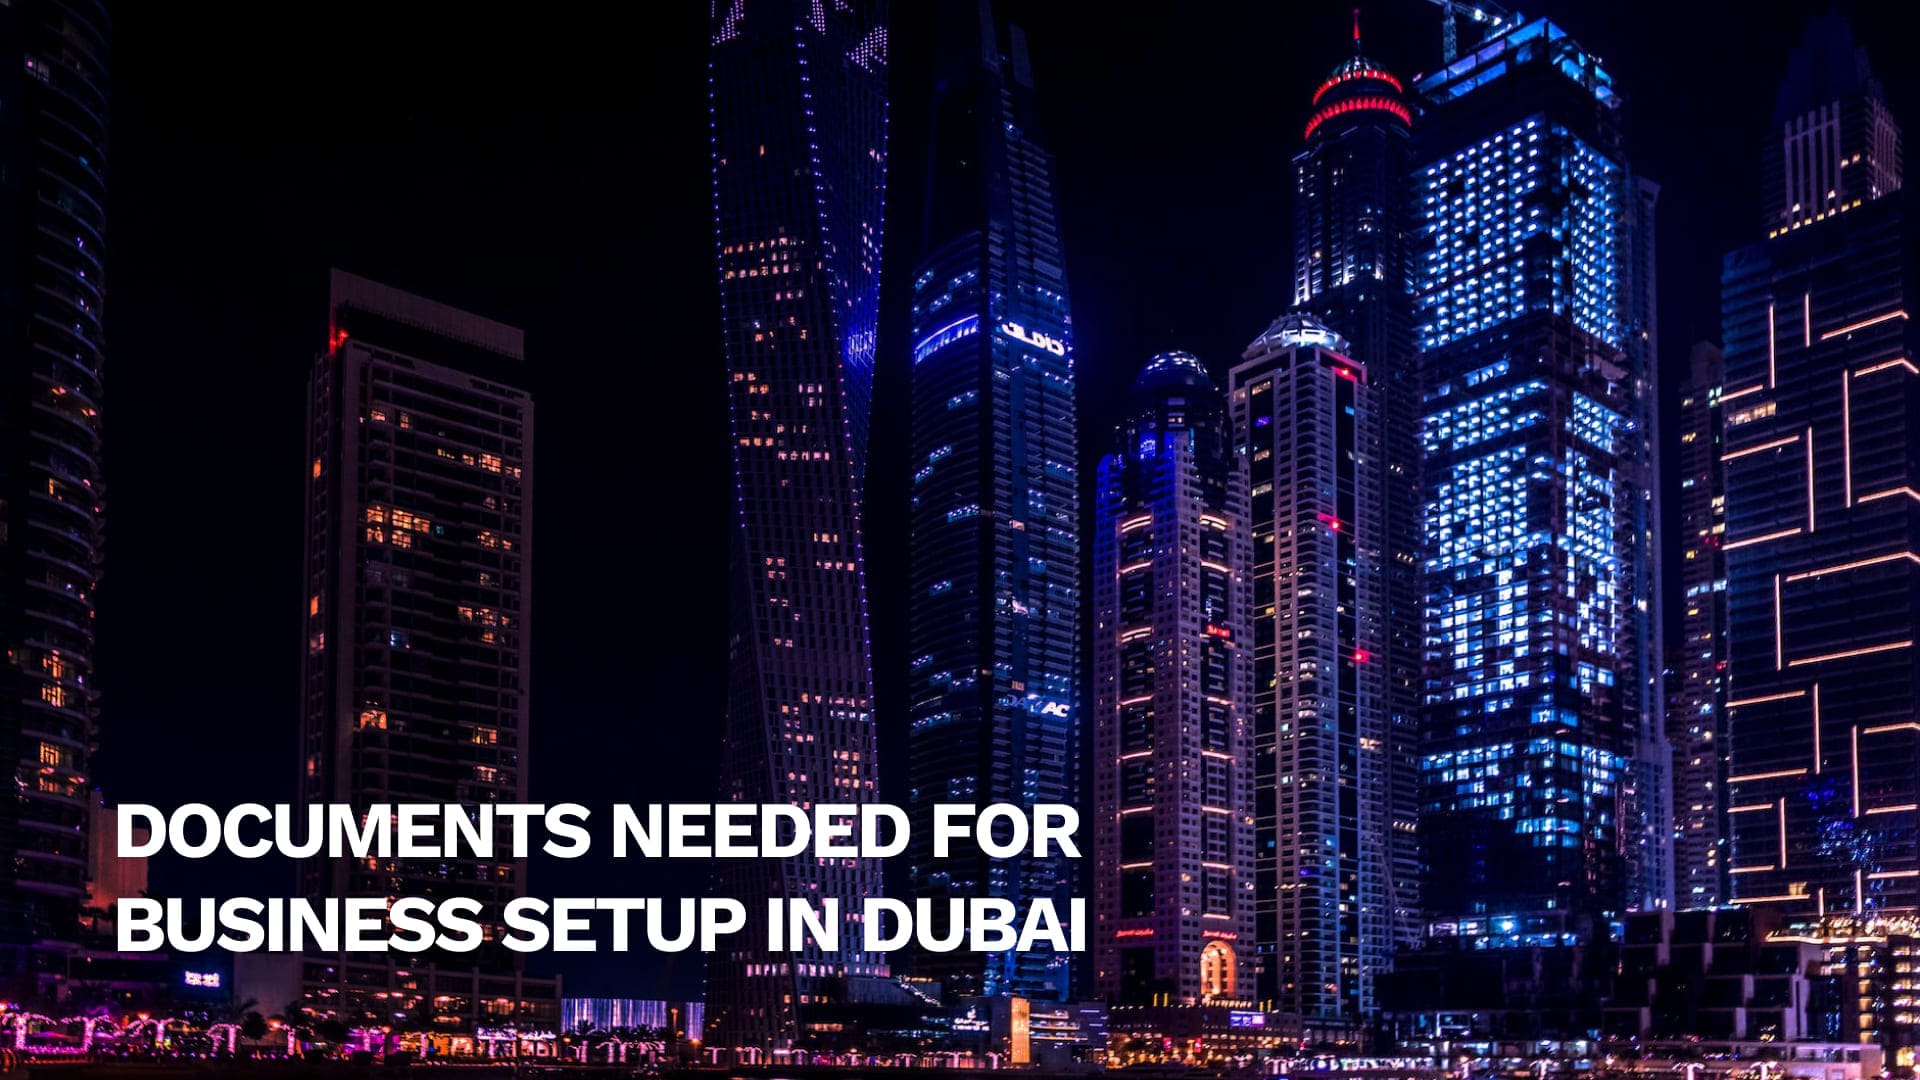 Documents Needed for Business Setup in Dubai